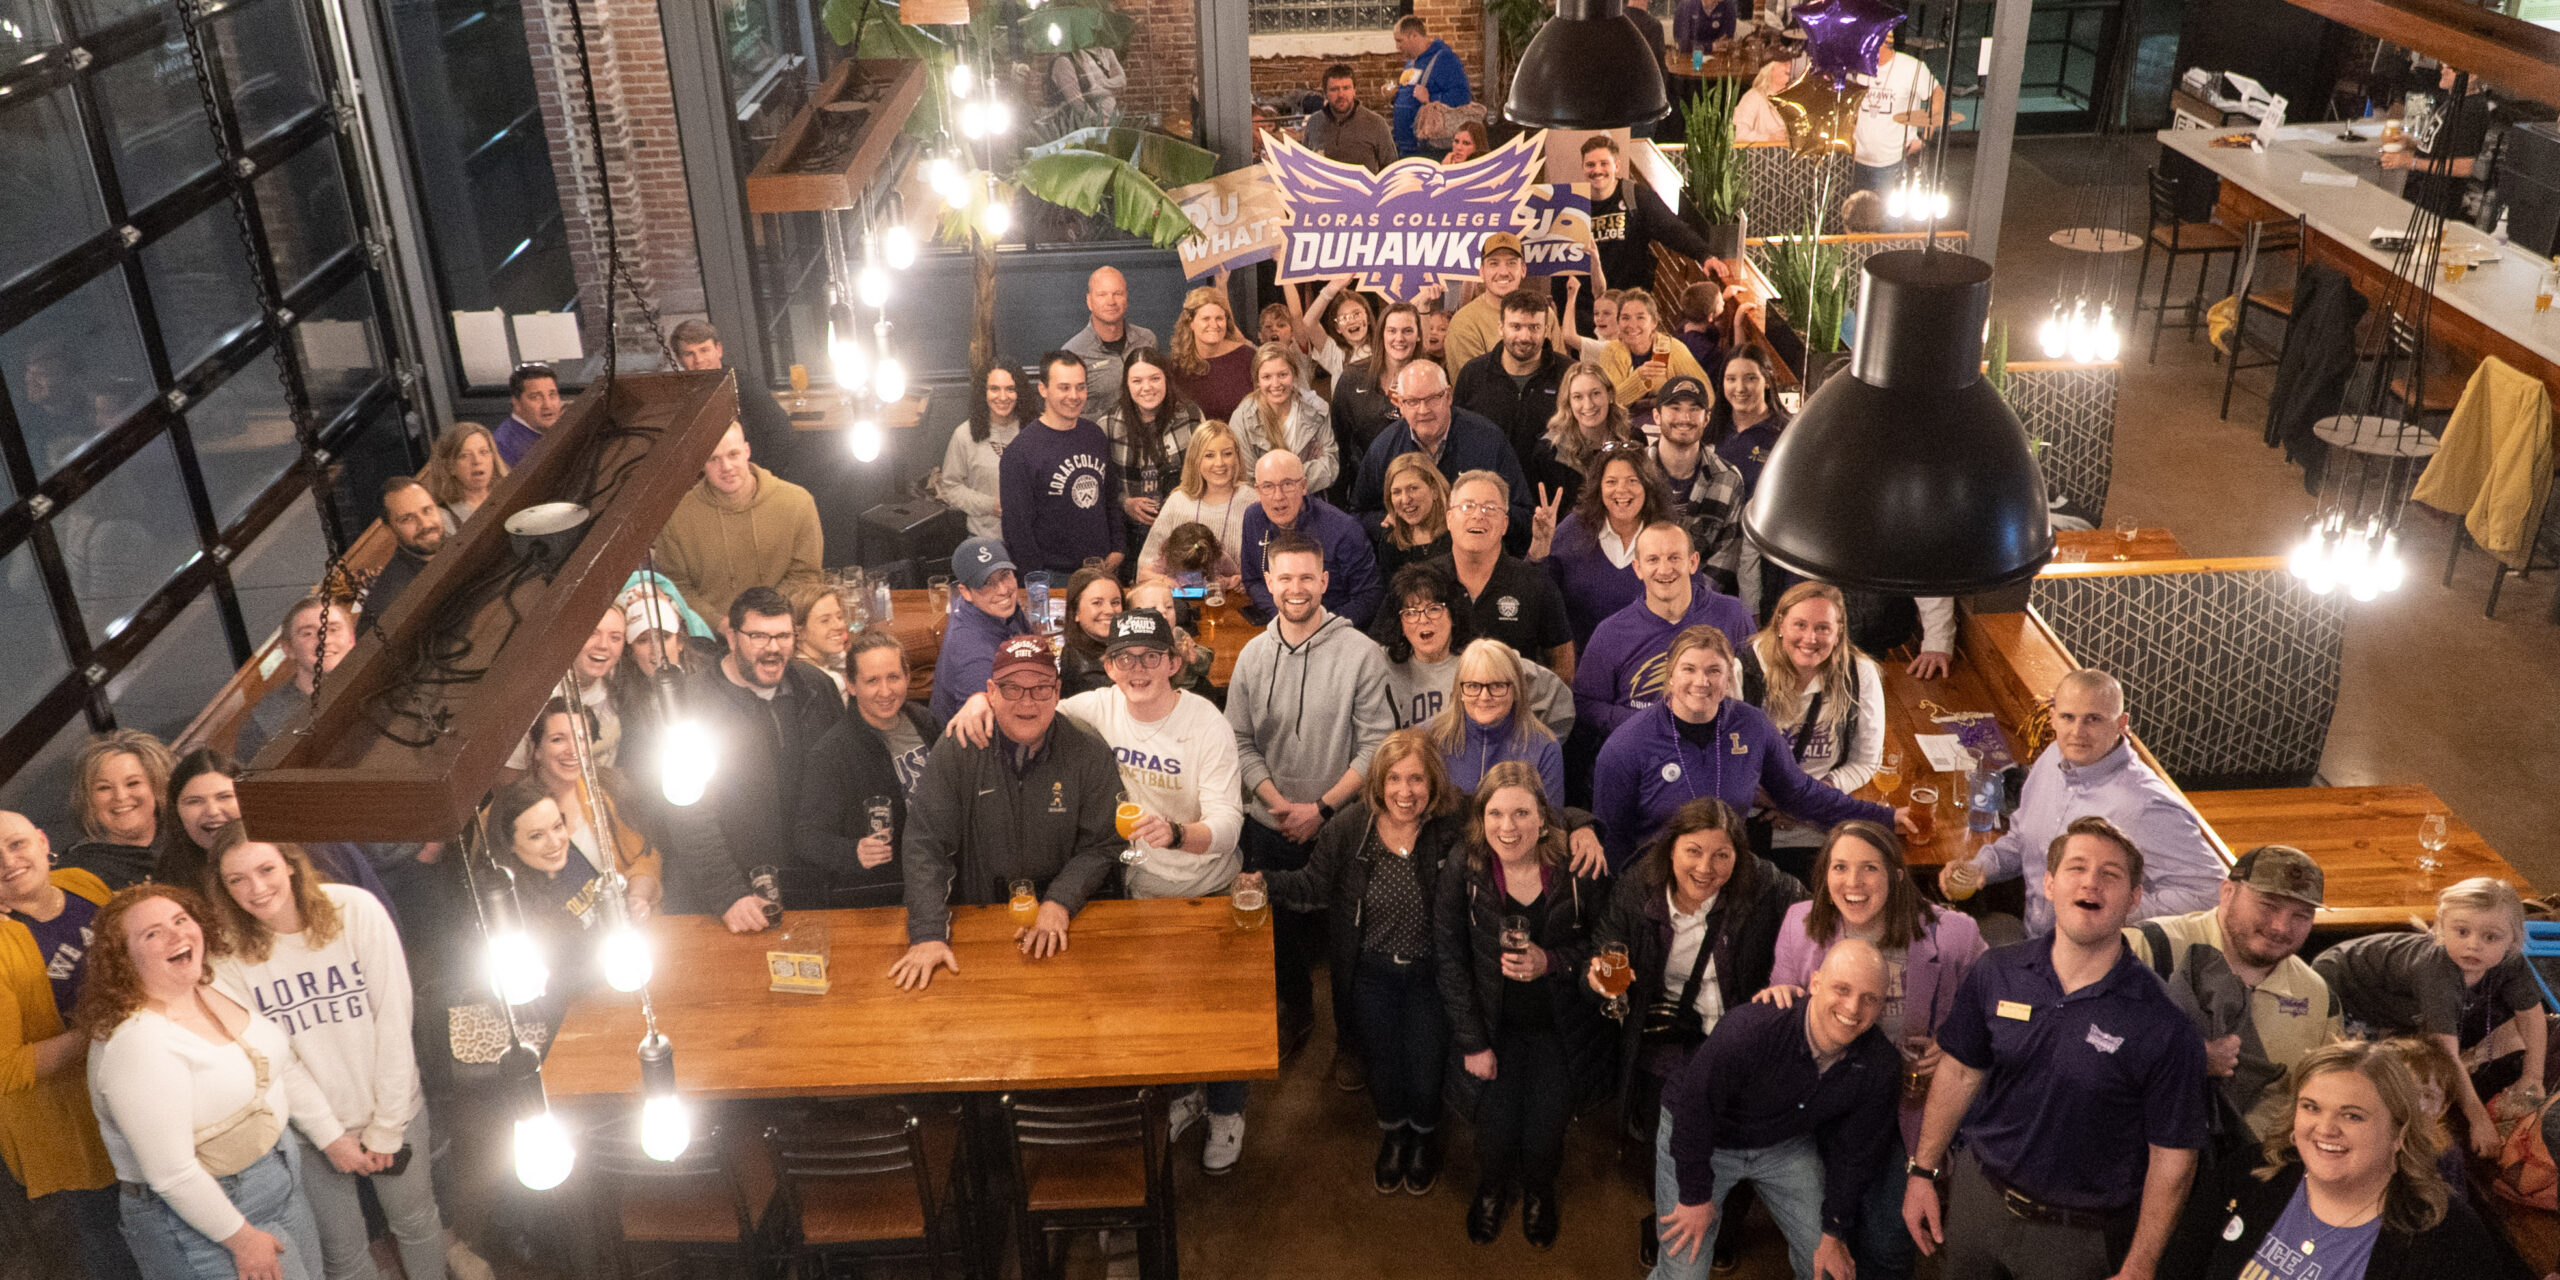 A Full house at Dimensional Brewing of Loras College Duhawk Alumni & friends gathering together to Unite, Celebrate, and Support Loras Student Success.